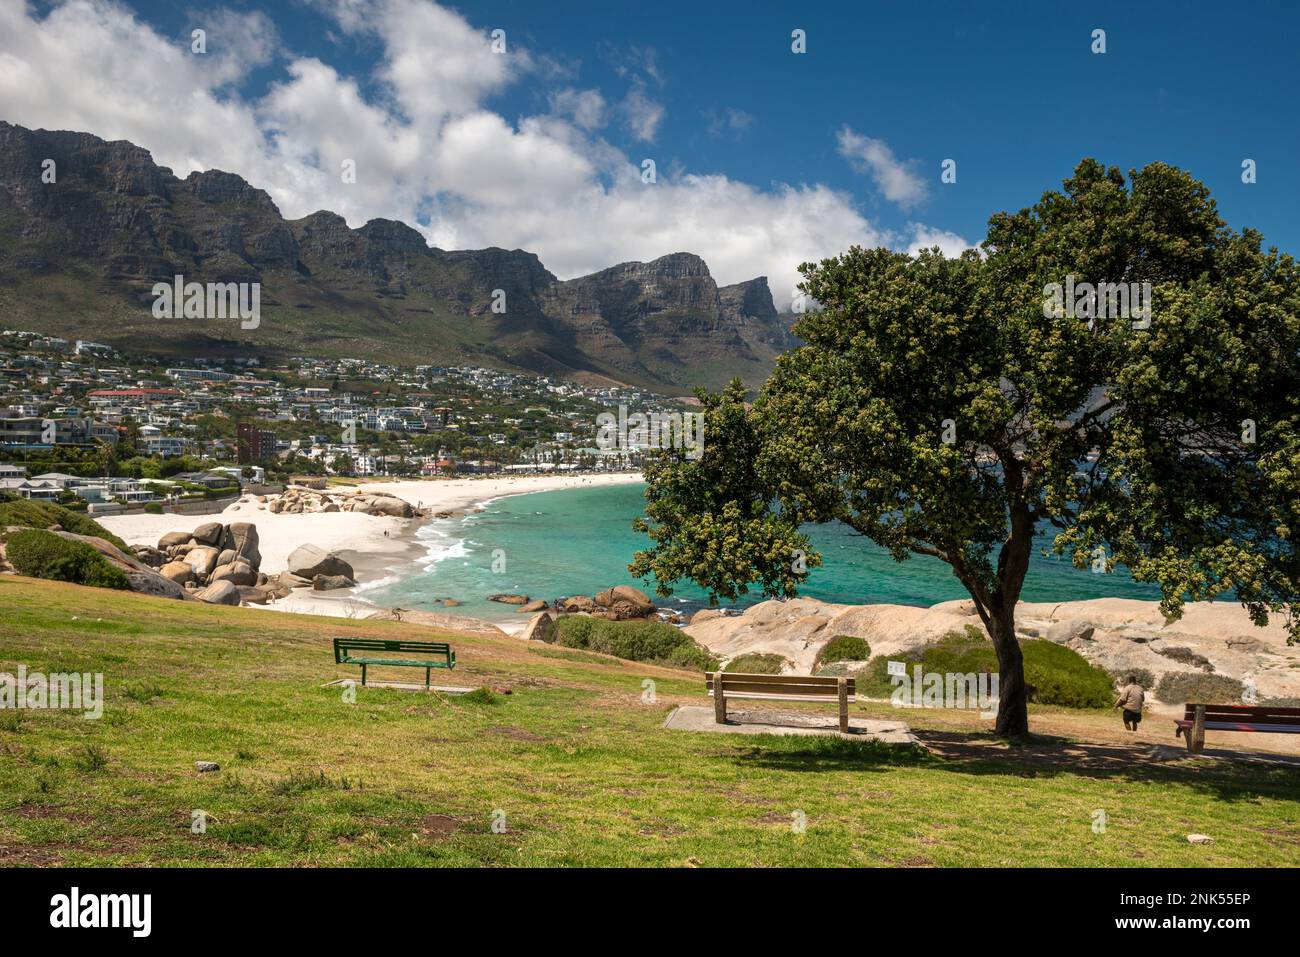 Camps Bay beach, South Africa Stock Photo